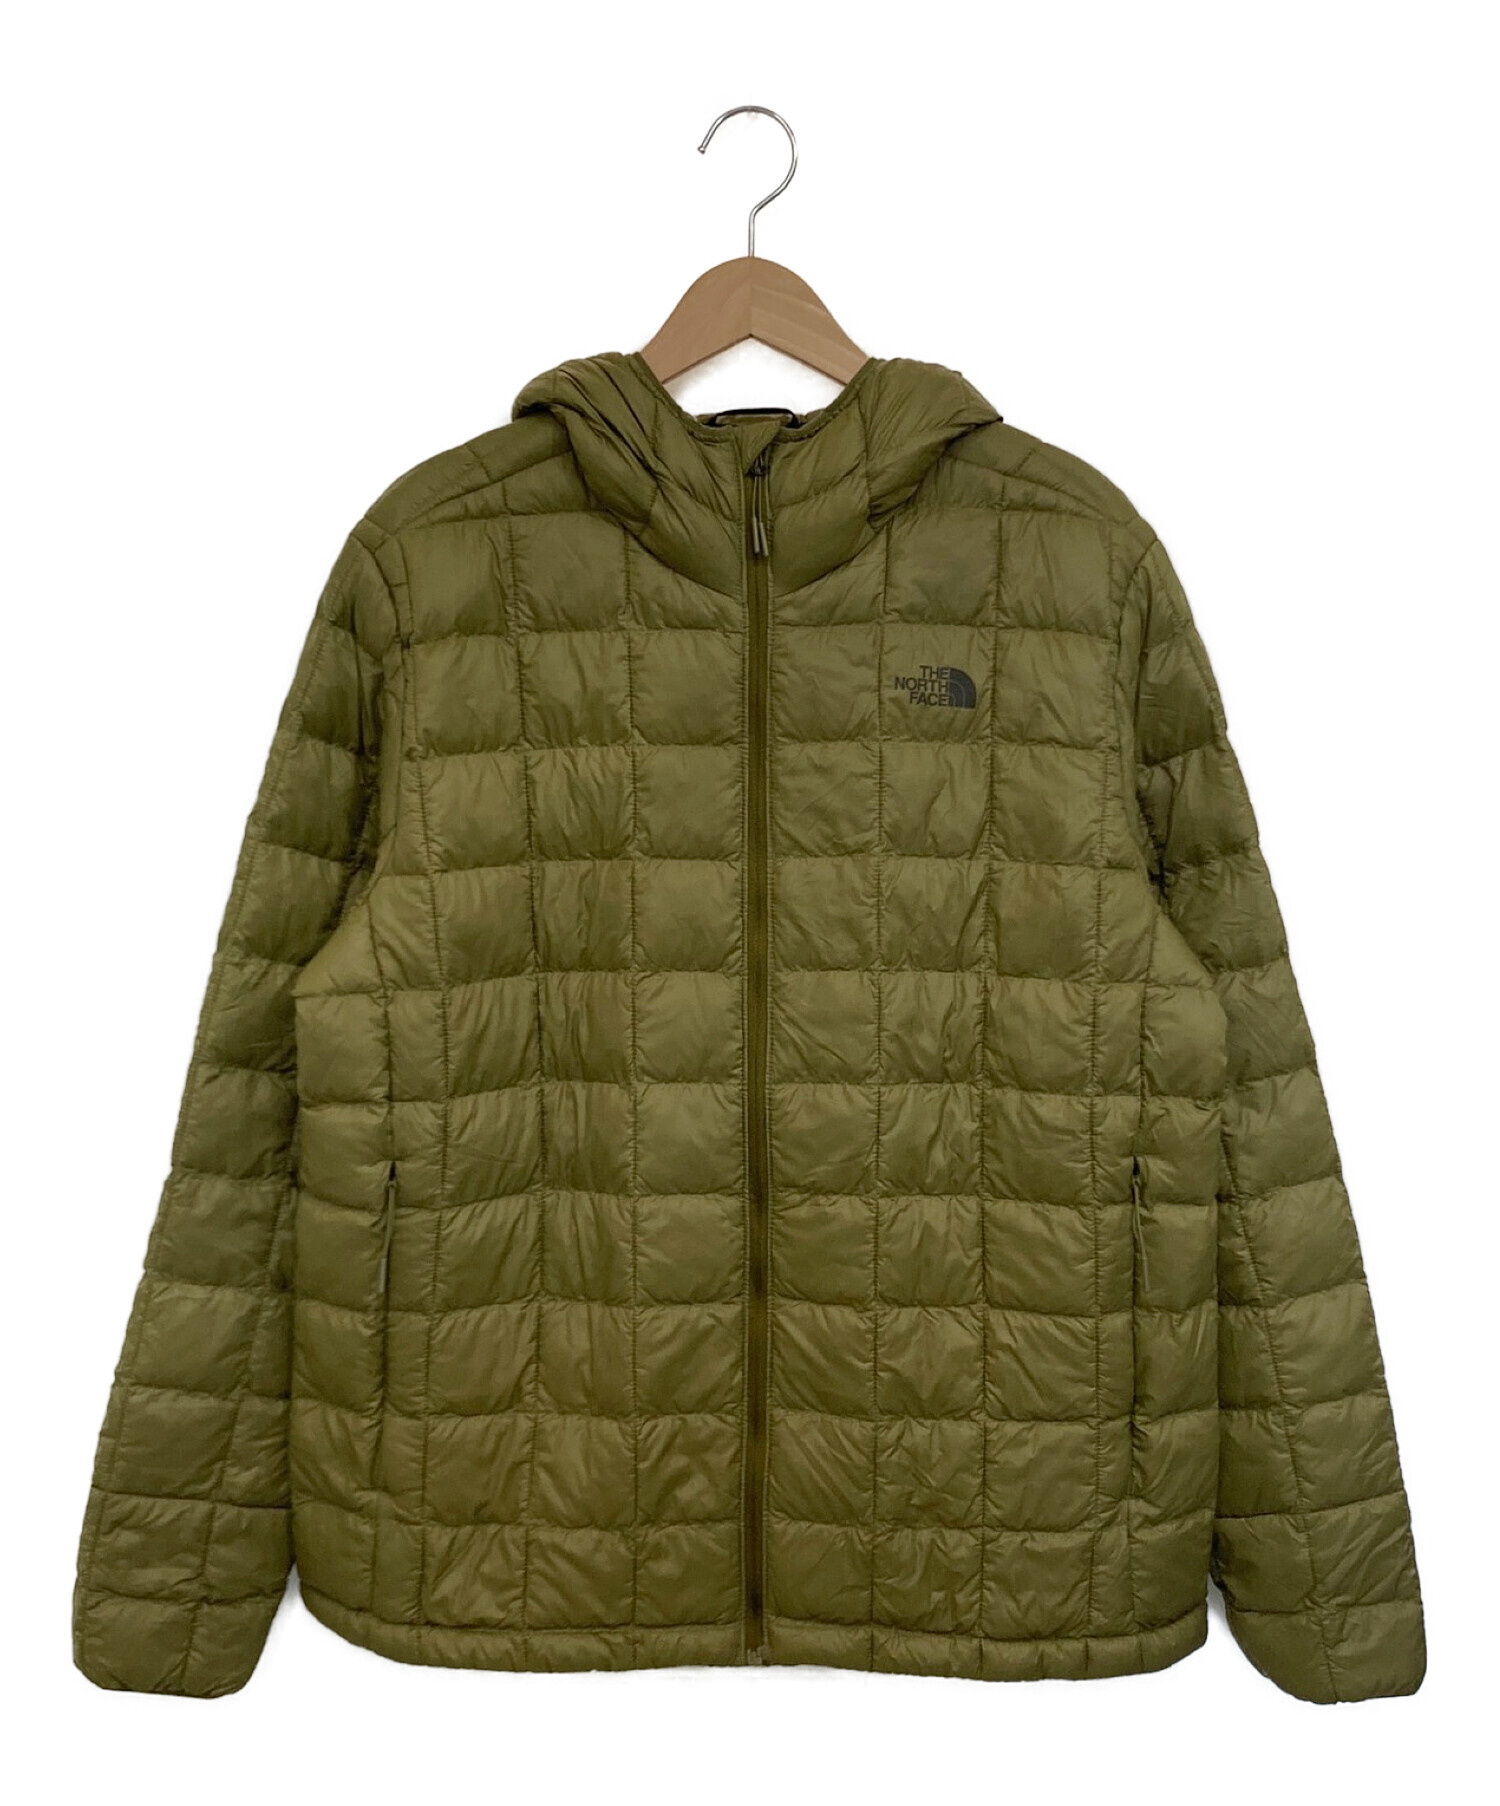 THE NORTH FACE THERMOBALL 中綿入りジャケット